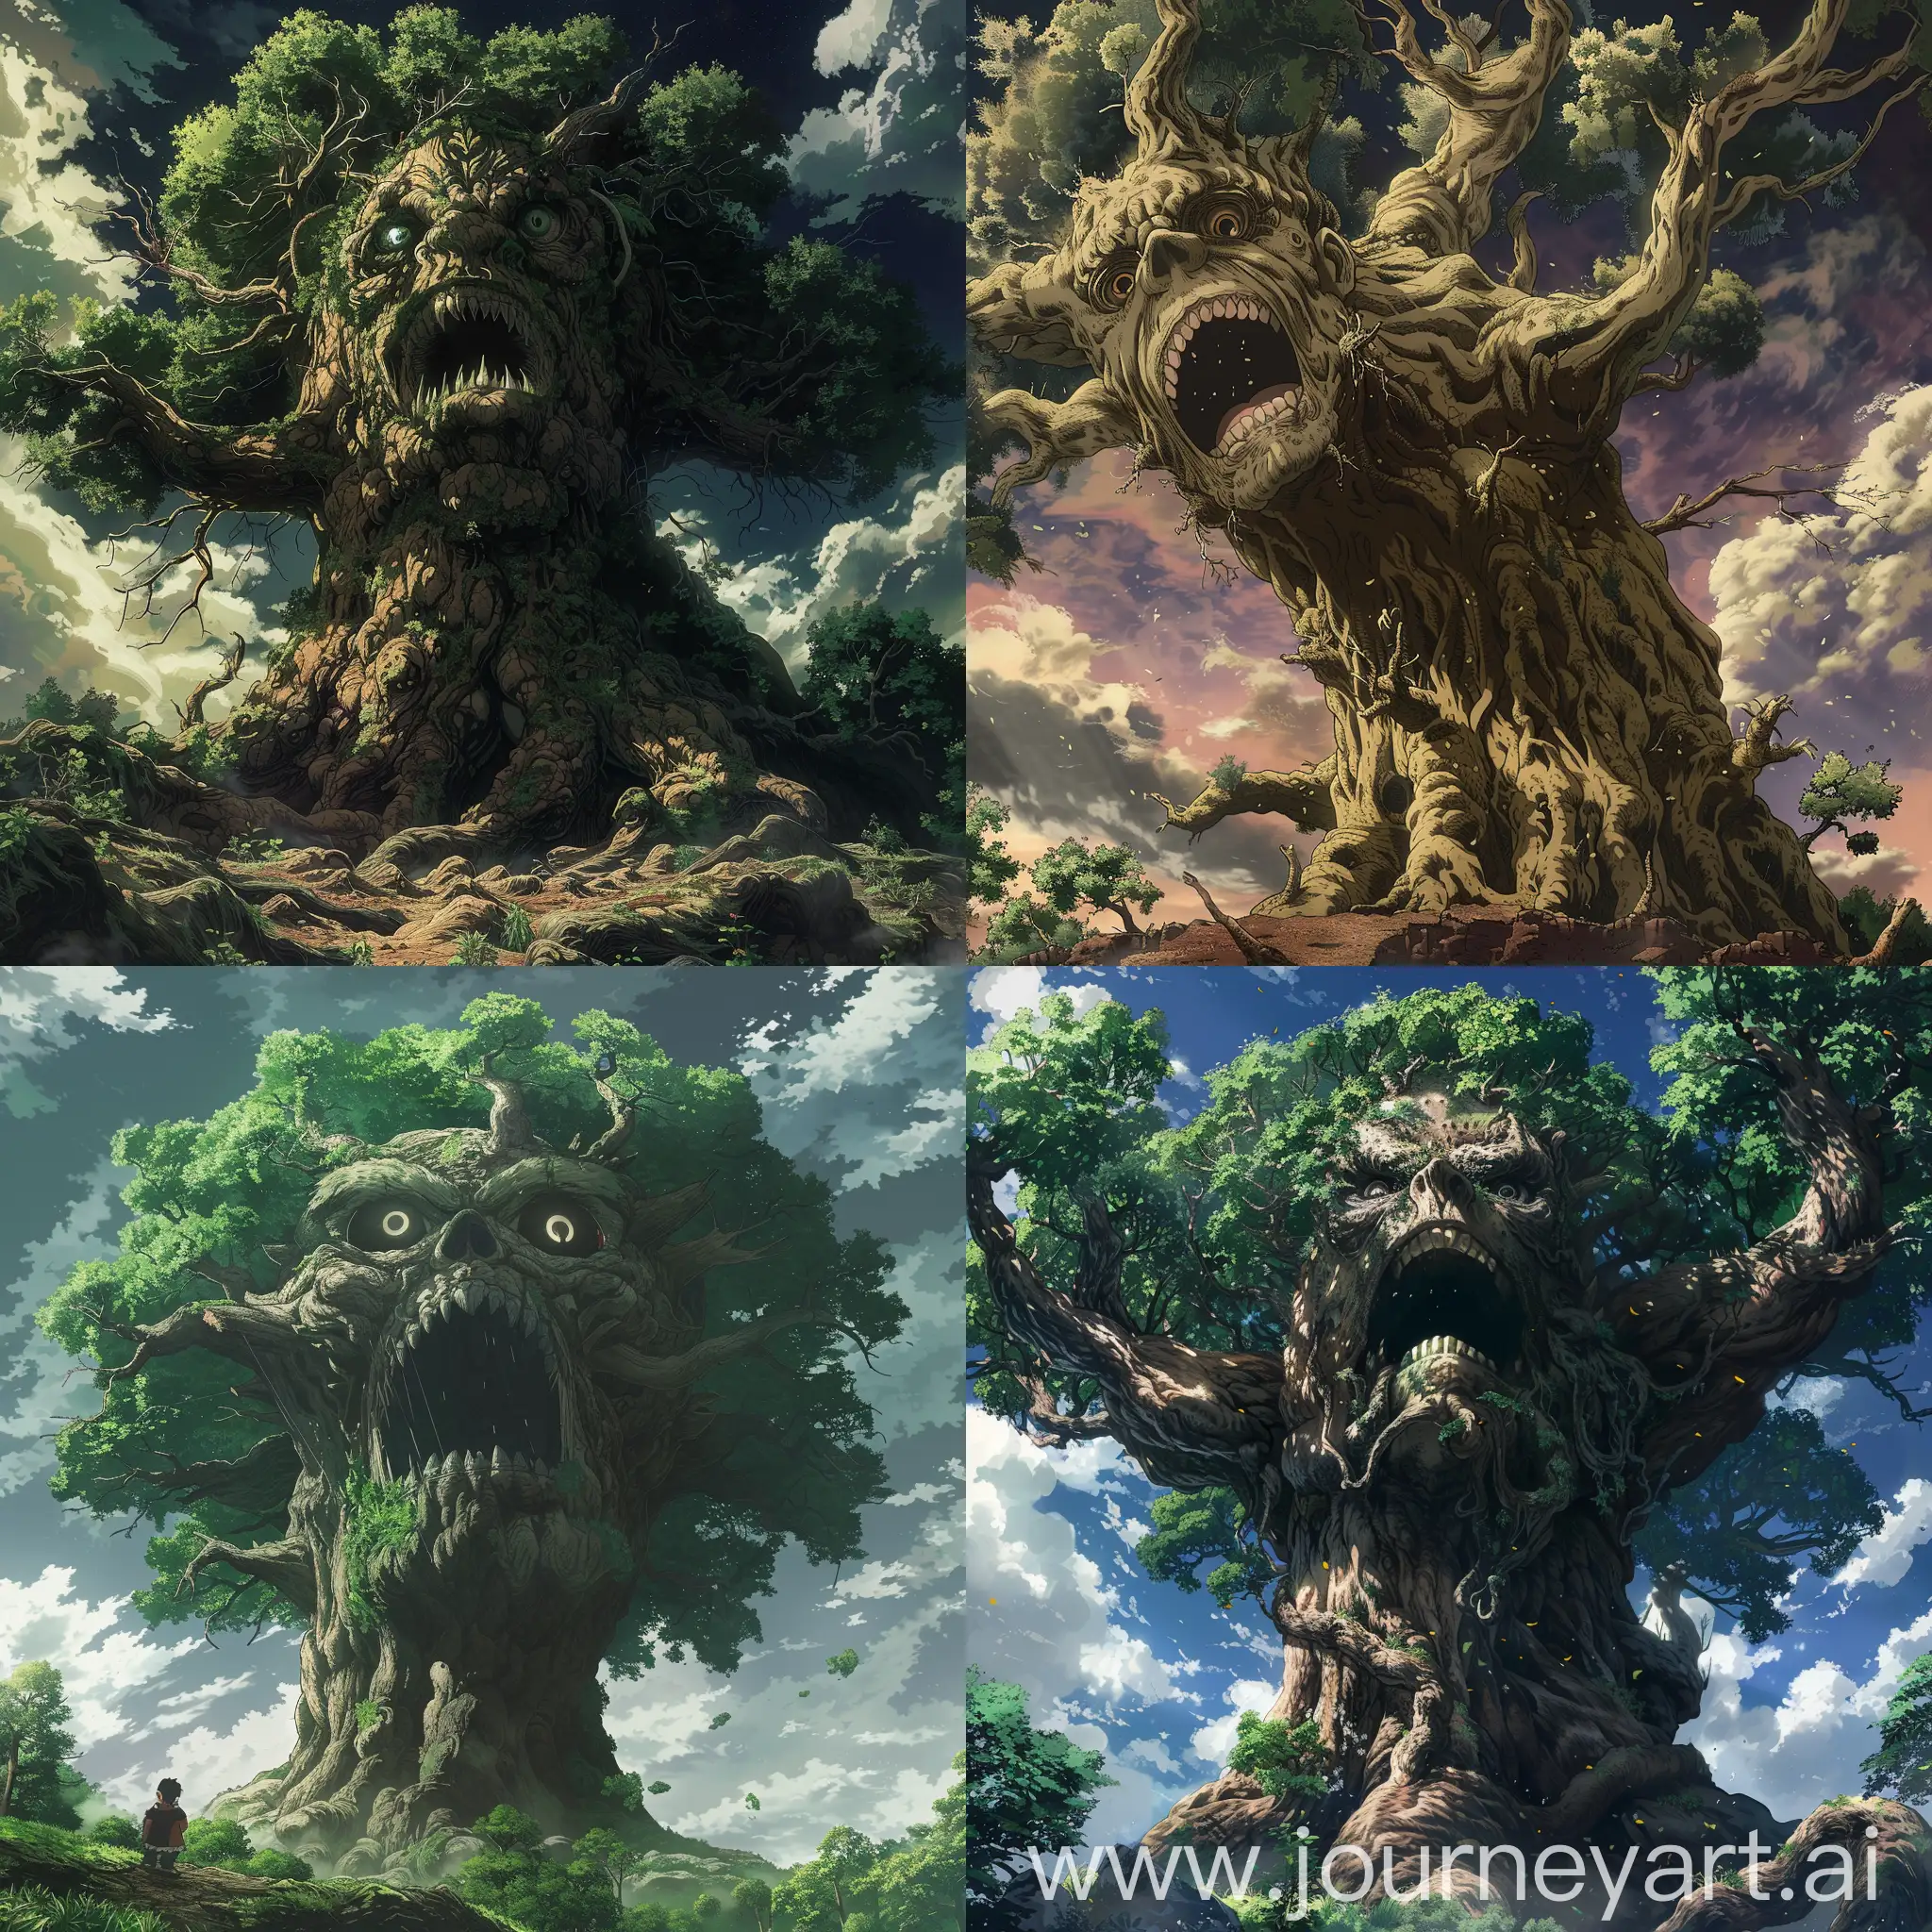 Majestic-AnimeStyle-Giant-Monster-Tree-in-a-Fantasy-Tale